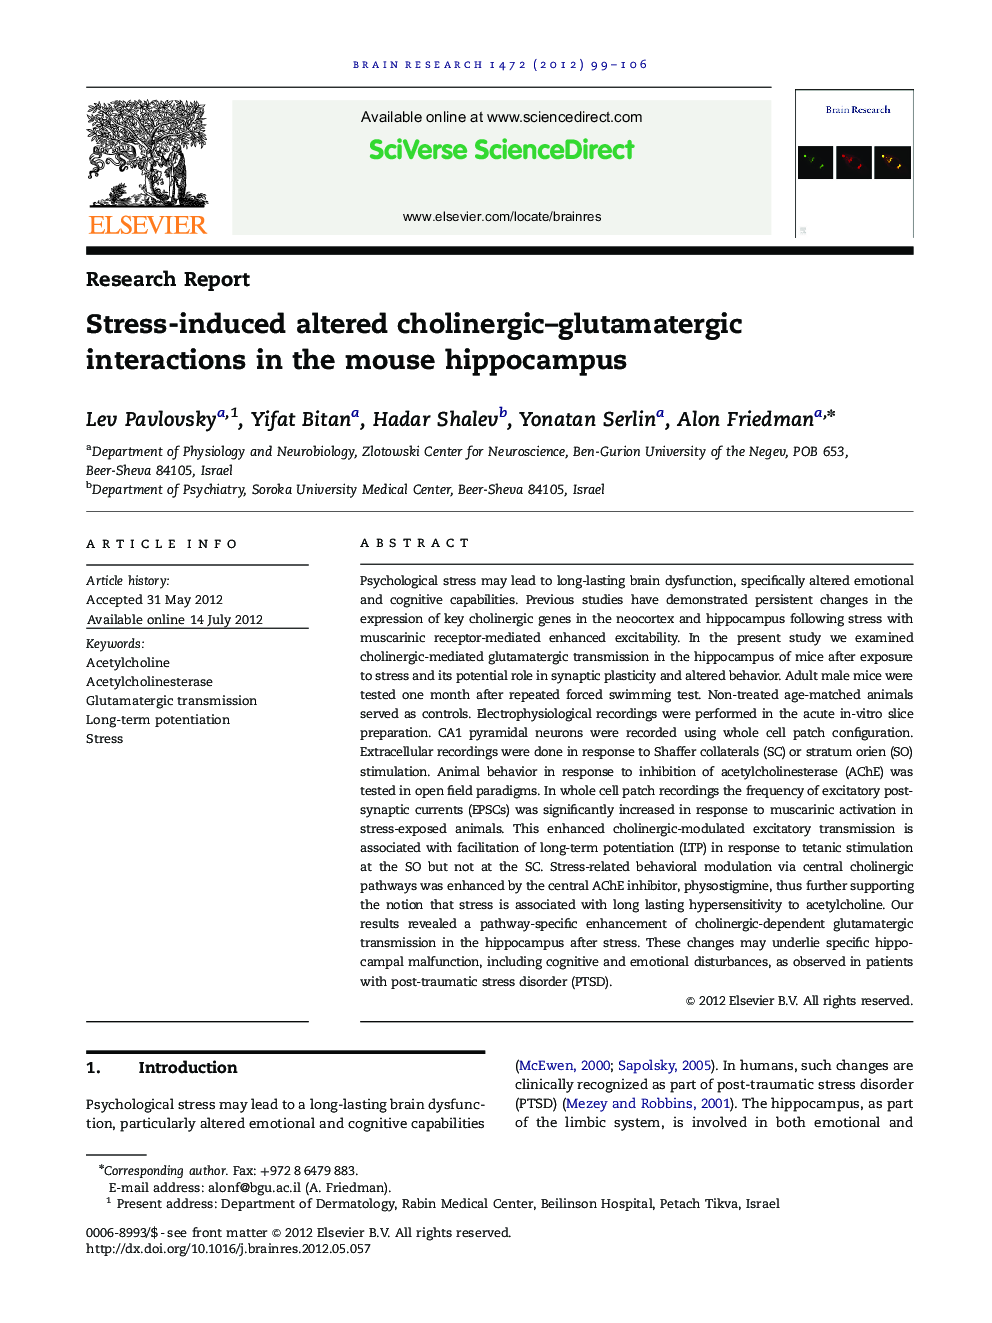 Stress-induced altered cholinergic-glutamatergic interactions in the mouse hippocampus